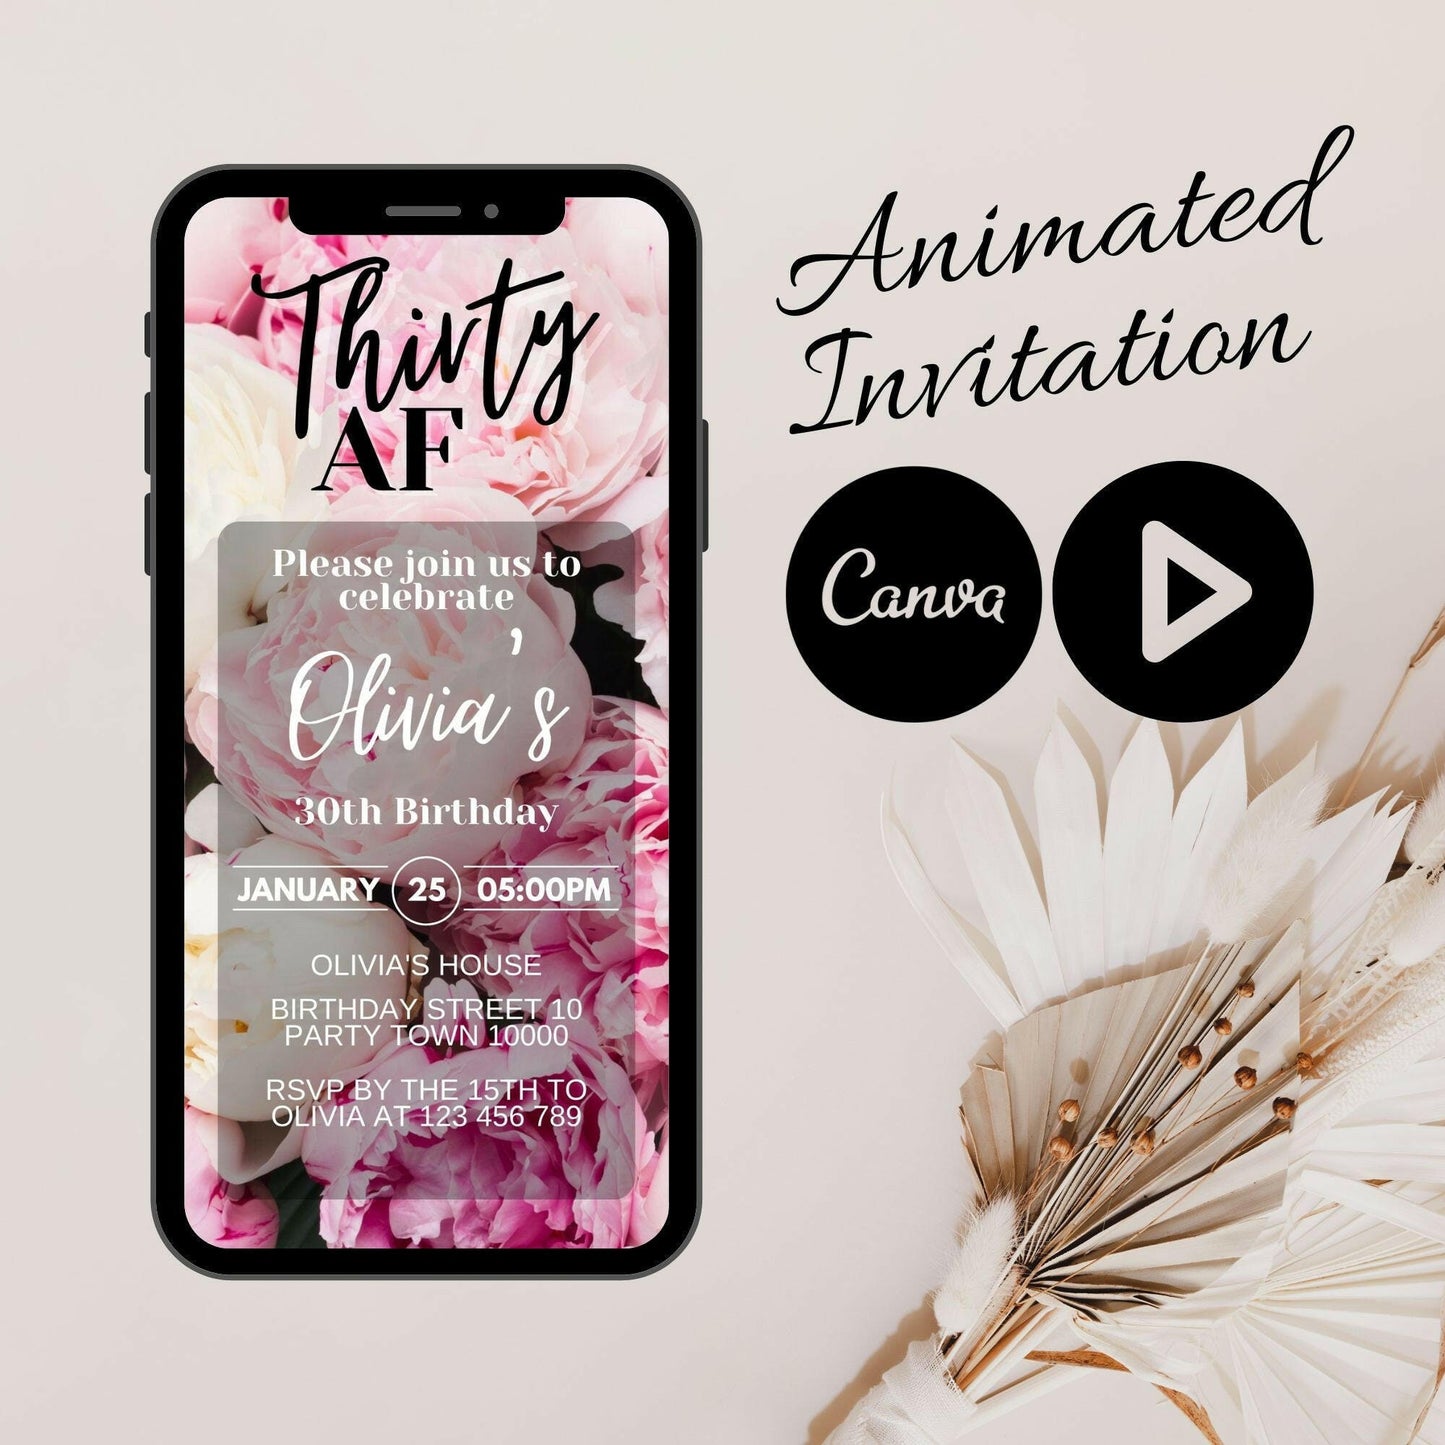 Thirty AF: Animated Video Invitation for Her Birthday Party with Mobile Option and Modern Canva Invitation - Let's Celebrate!